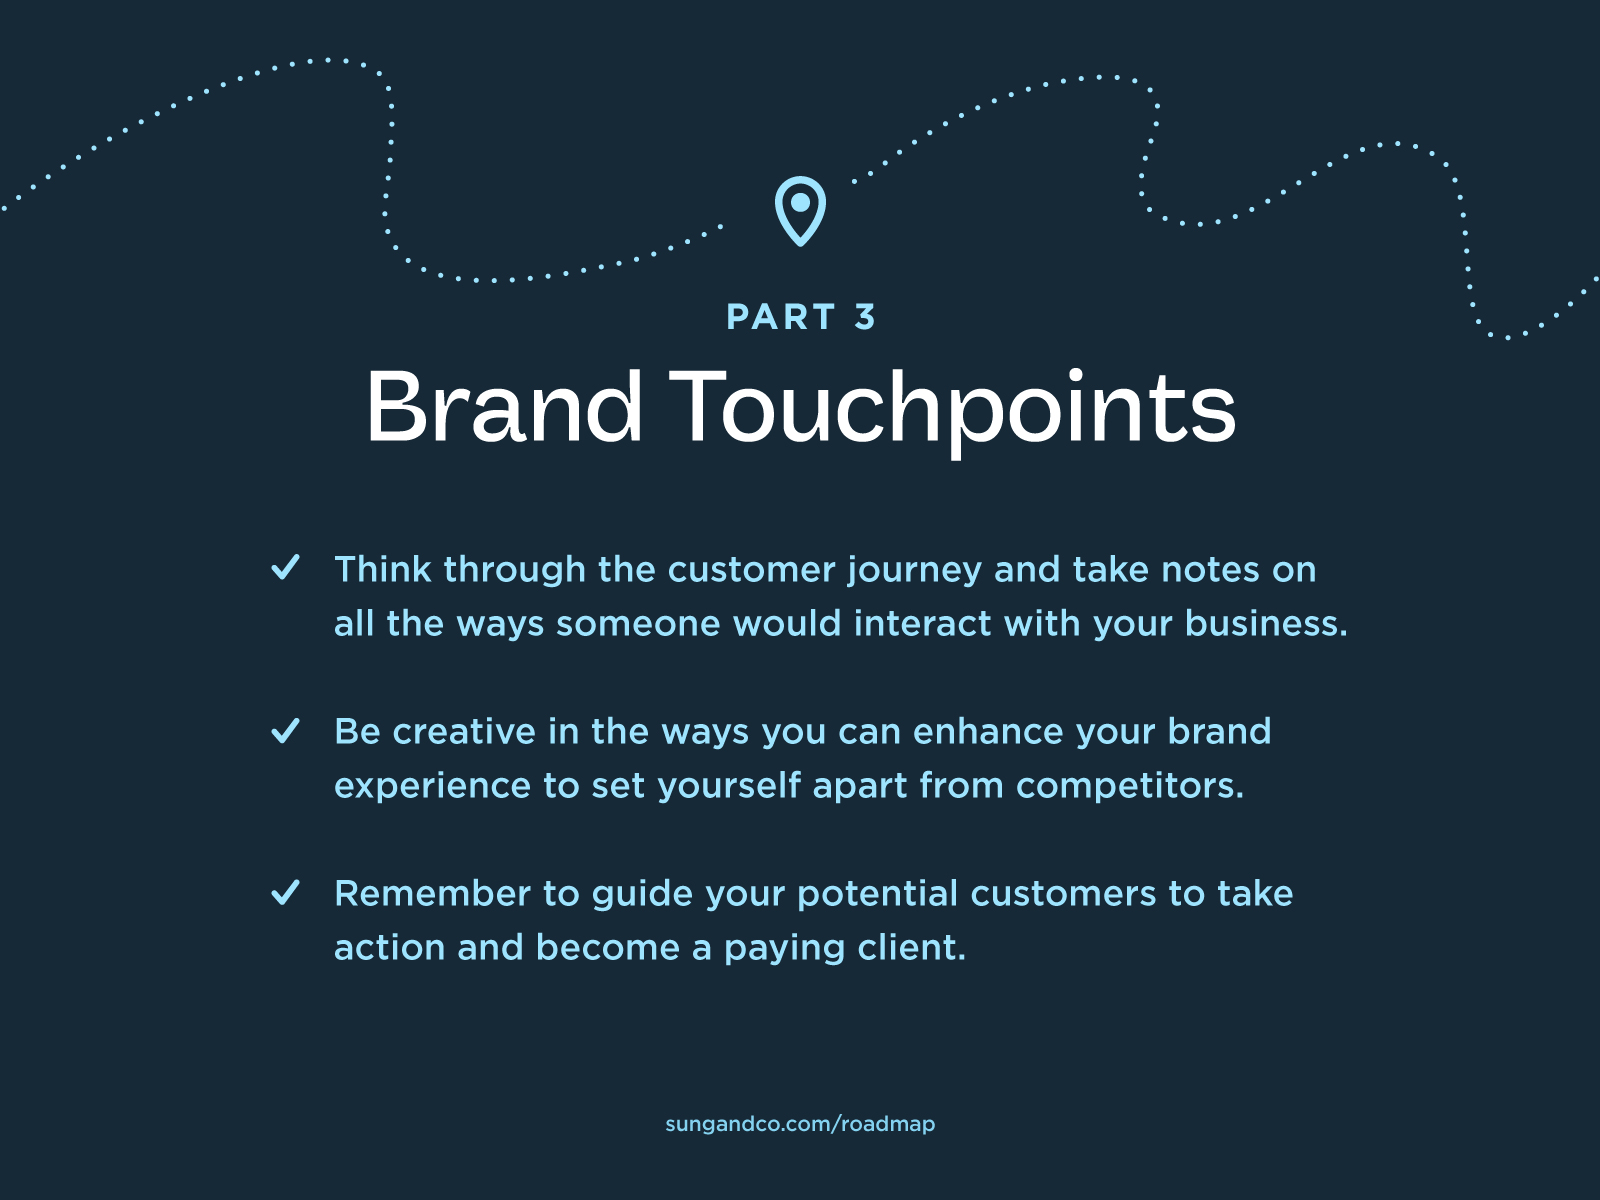 Brand strategy part 3: Brand Touchpoints